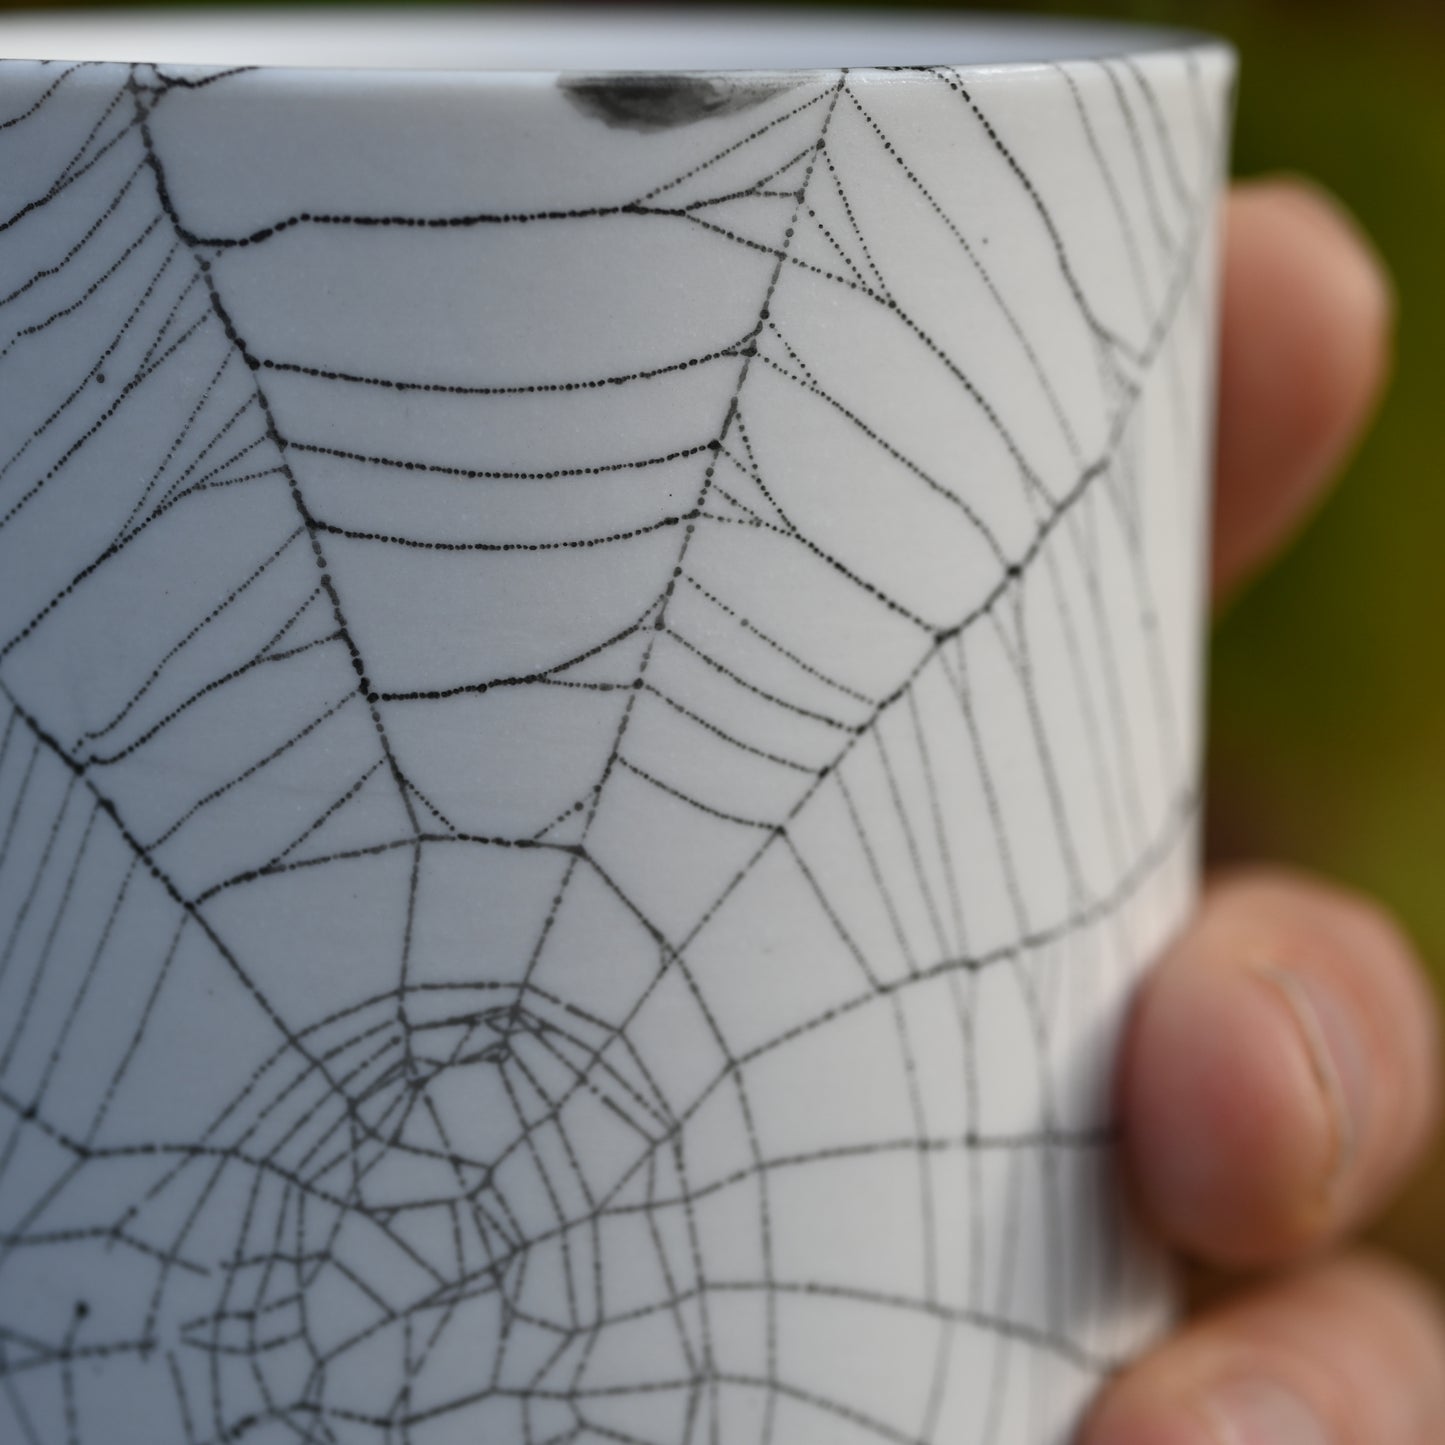 Web on Clay (085), Collected September 04, 2022